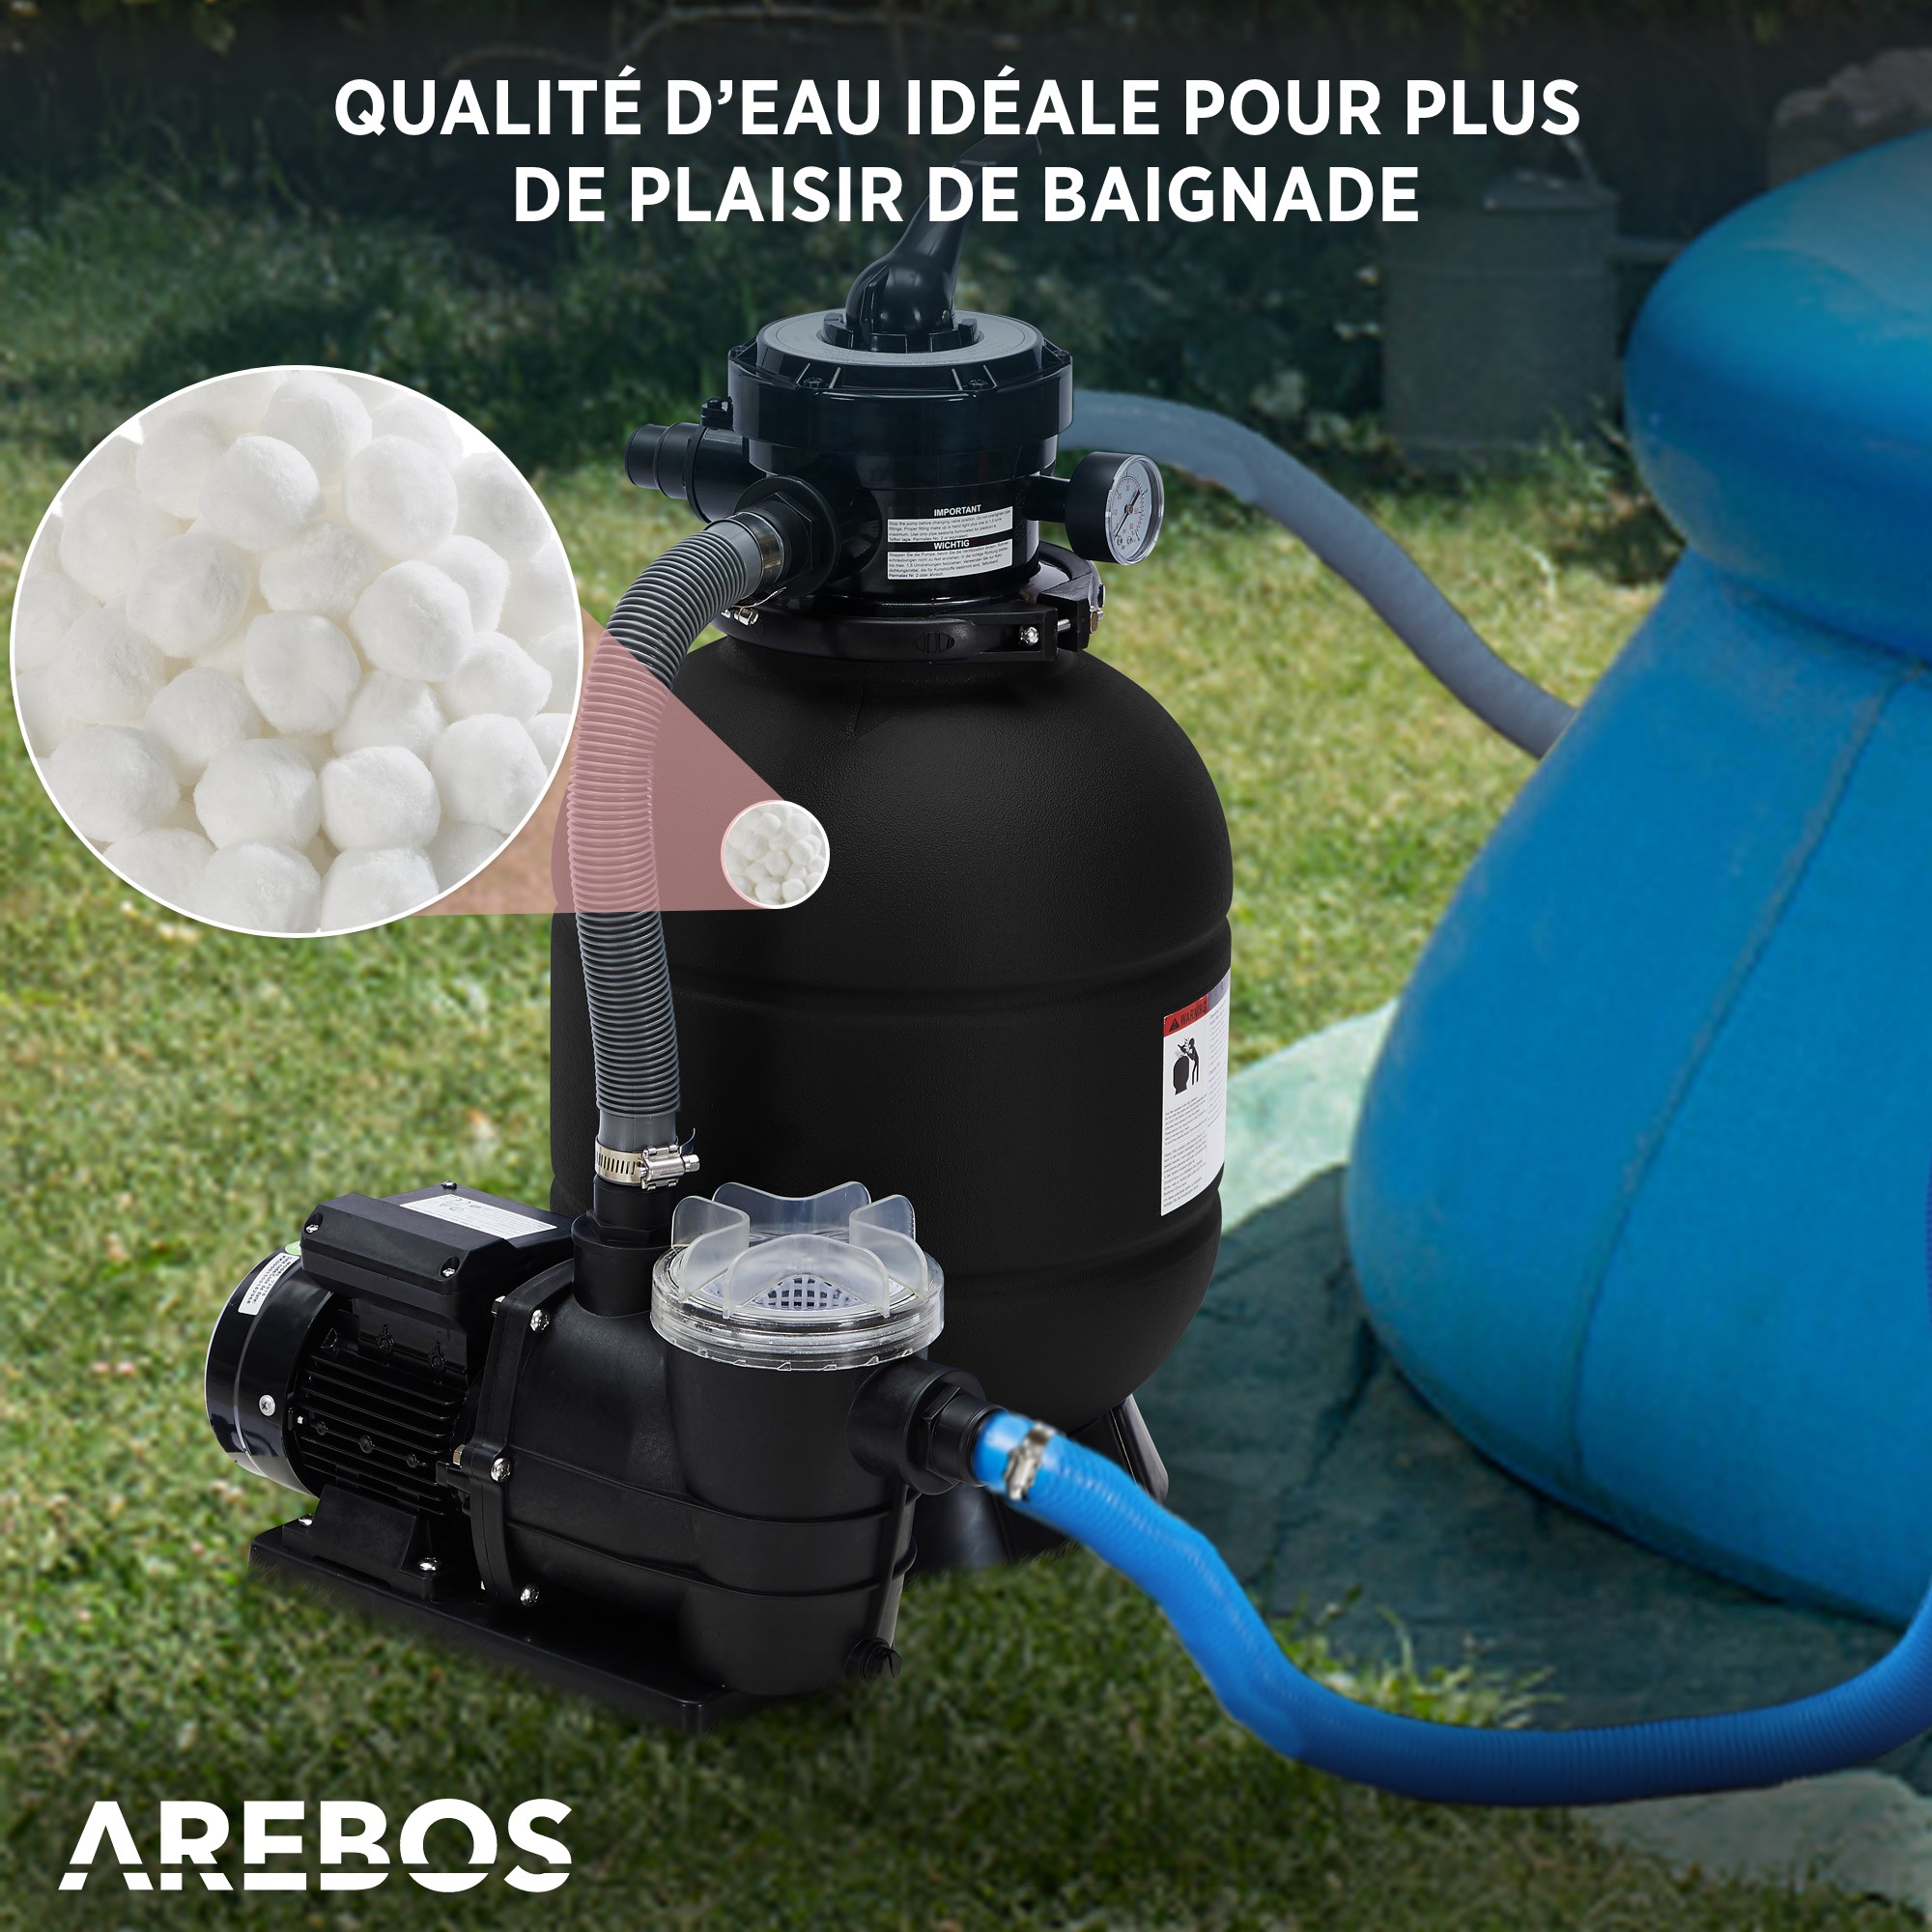 Arebos AREBOS Kit by-pass piscineUniversel pour les chauffe-eau solaires 